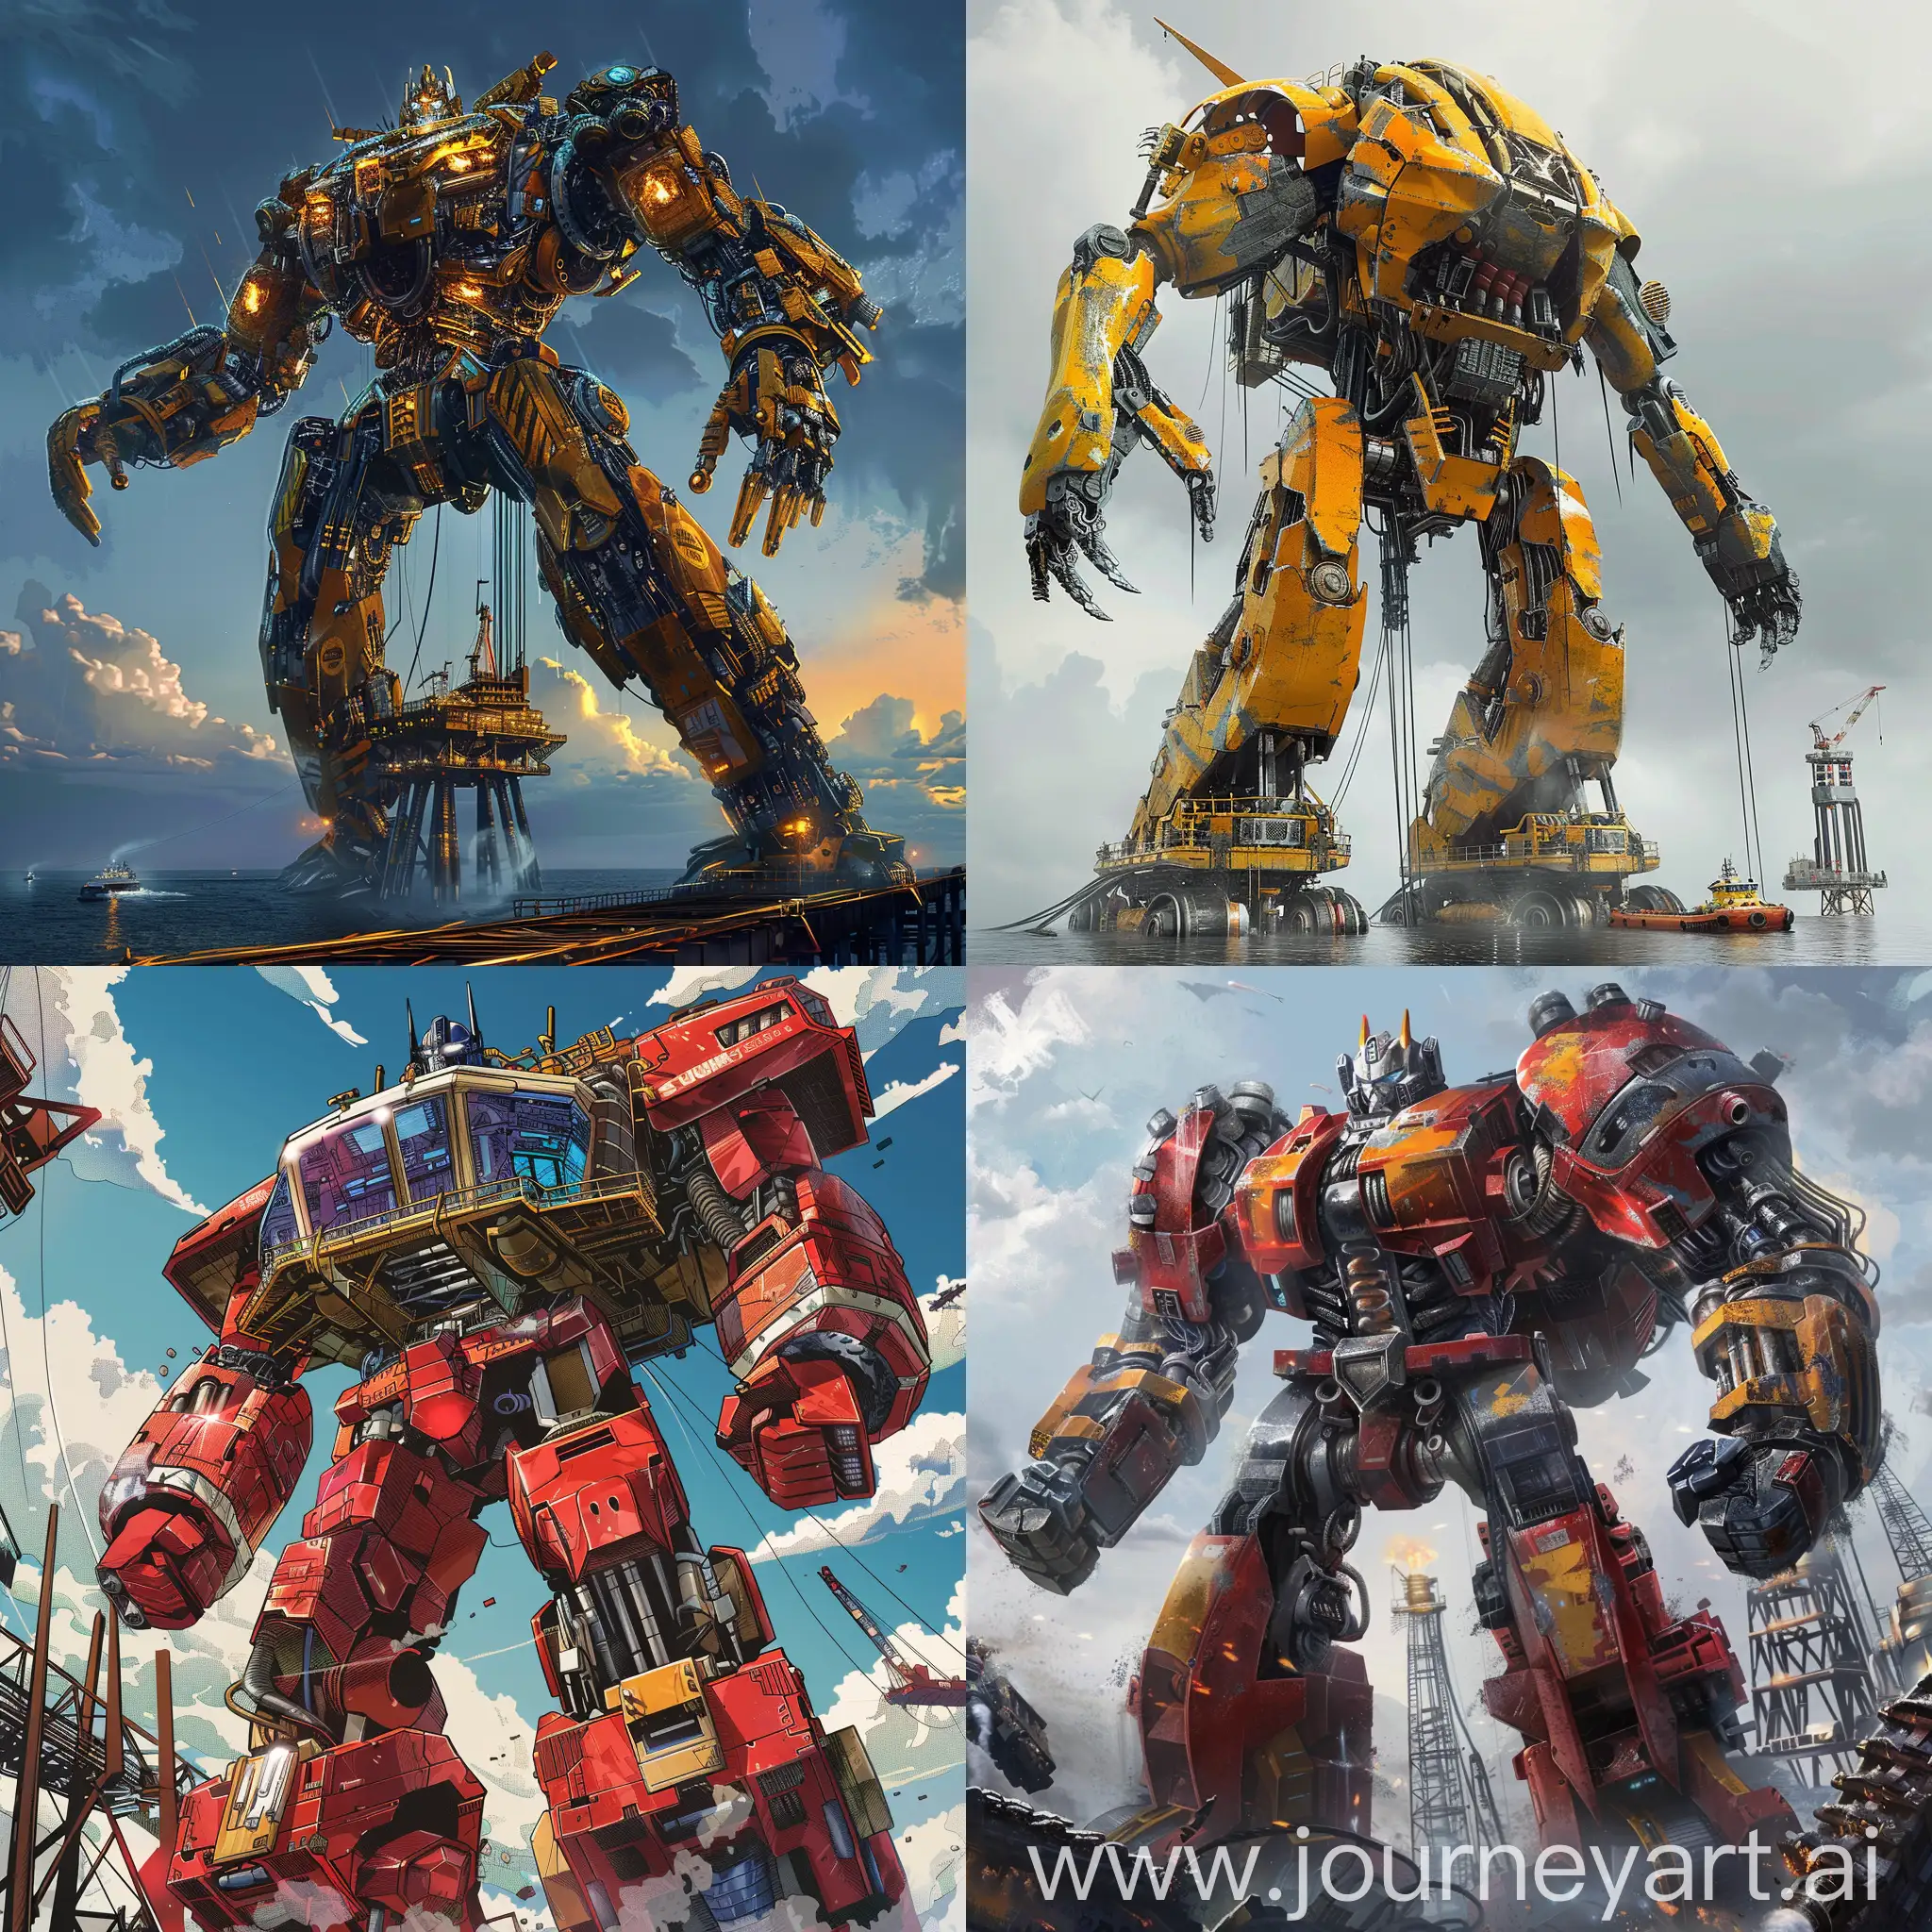 Omega Supreme from transformers, but he transforms in oil platform